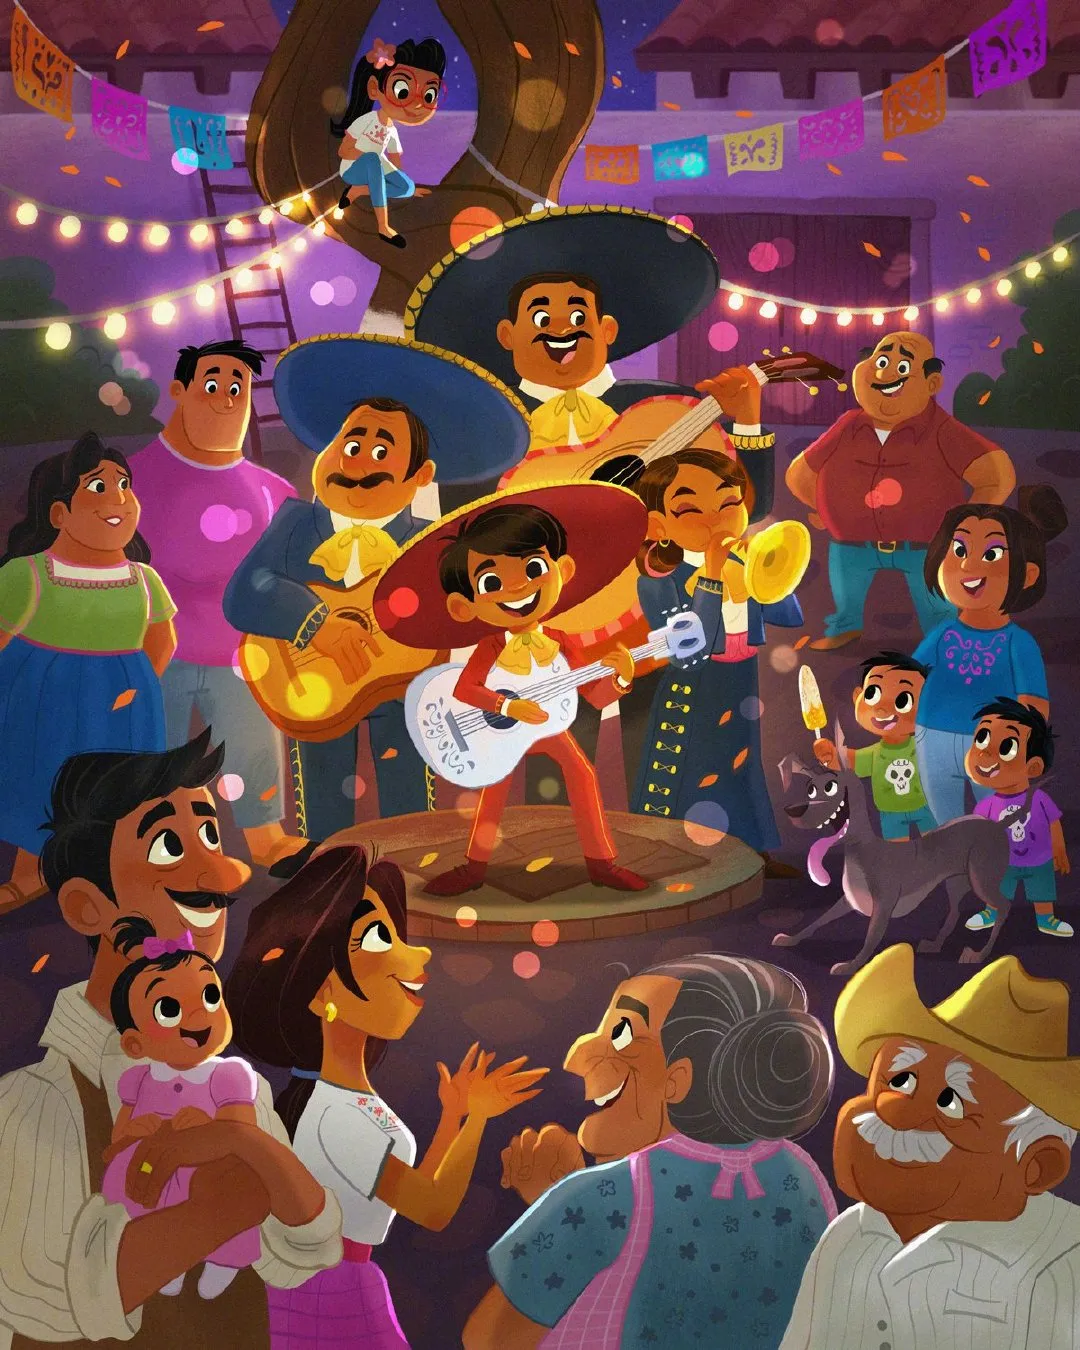 Pixar shares 'Coco' art poster, "Music Brings Families Together!" | FMV6